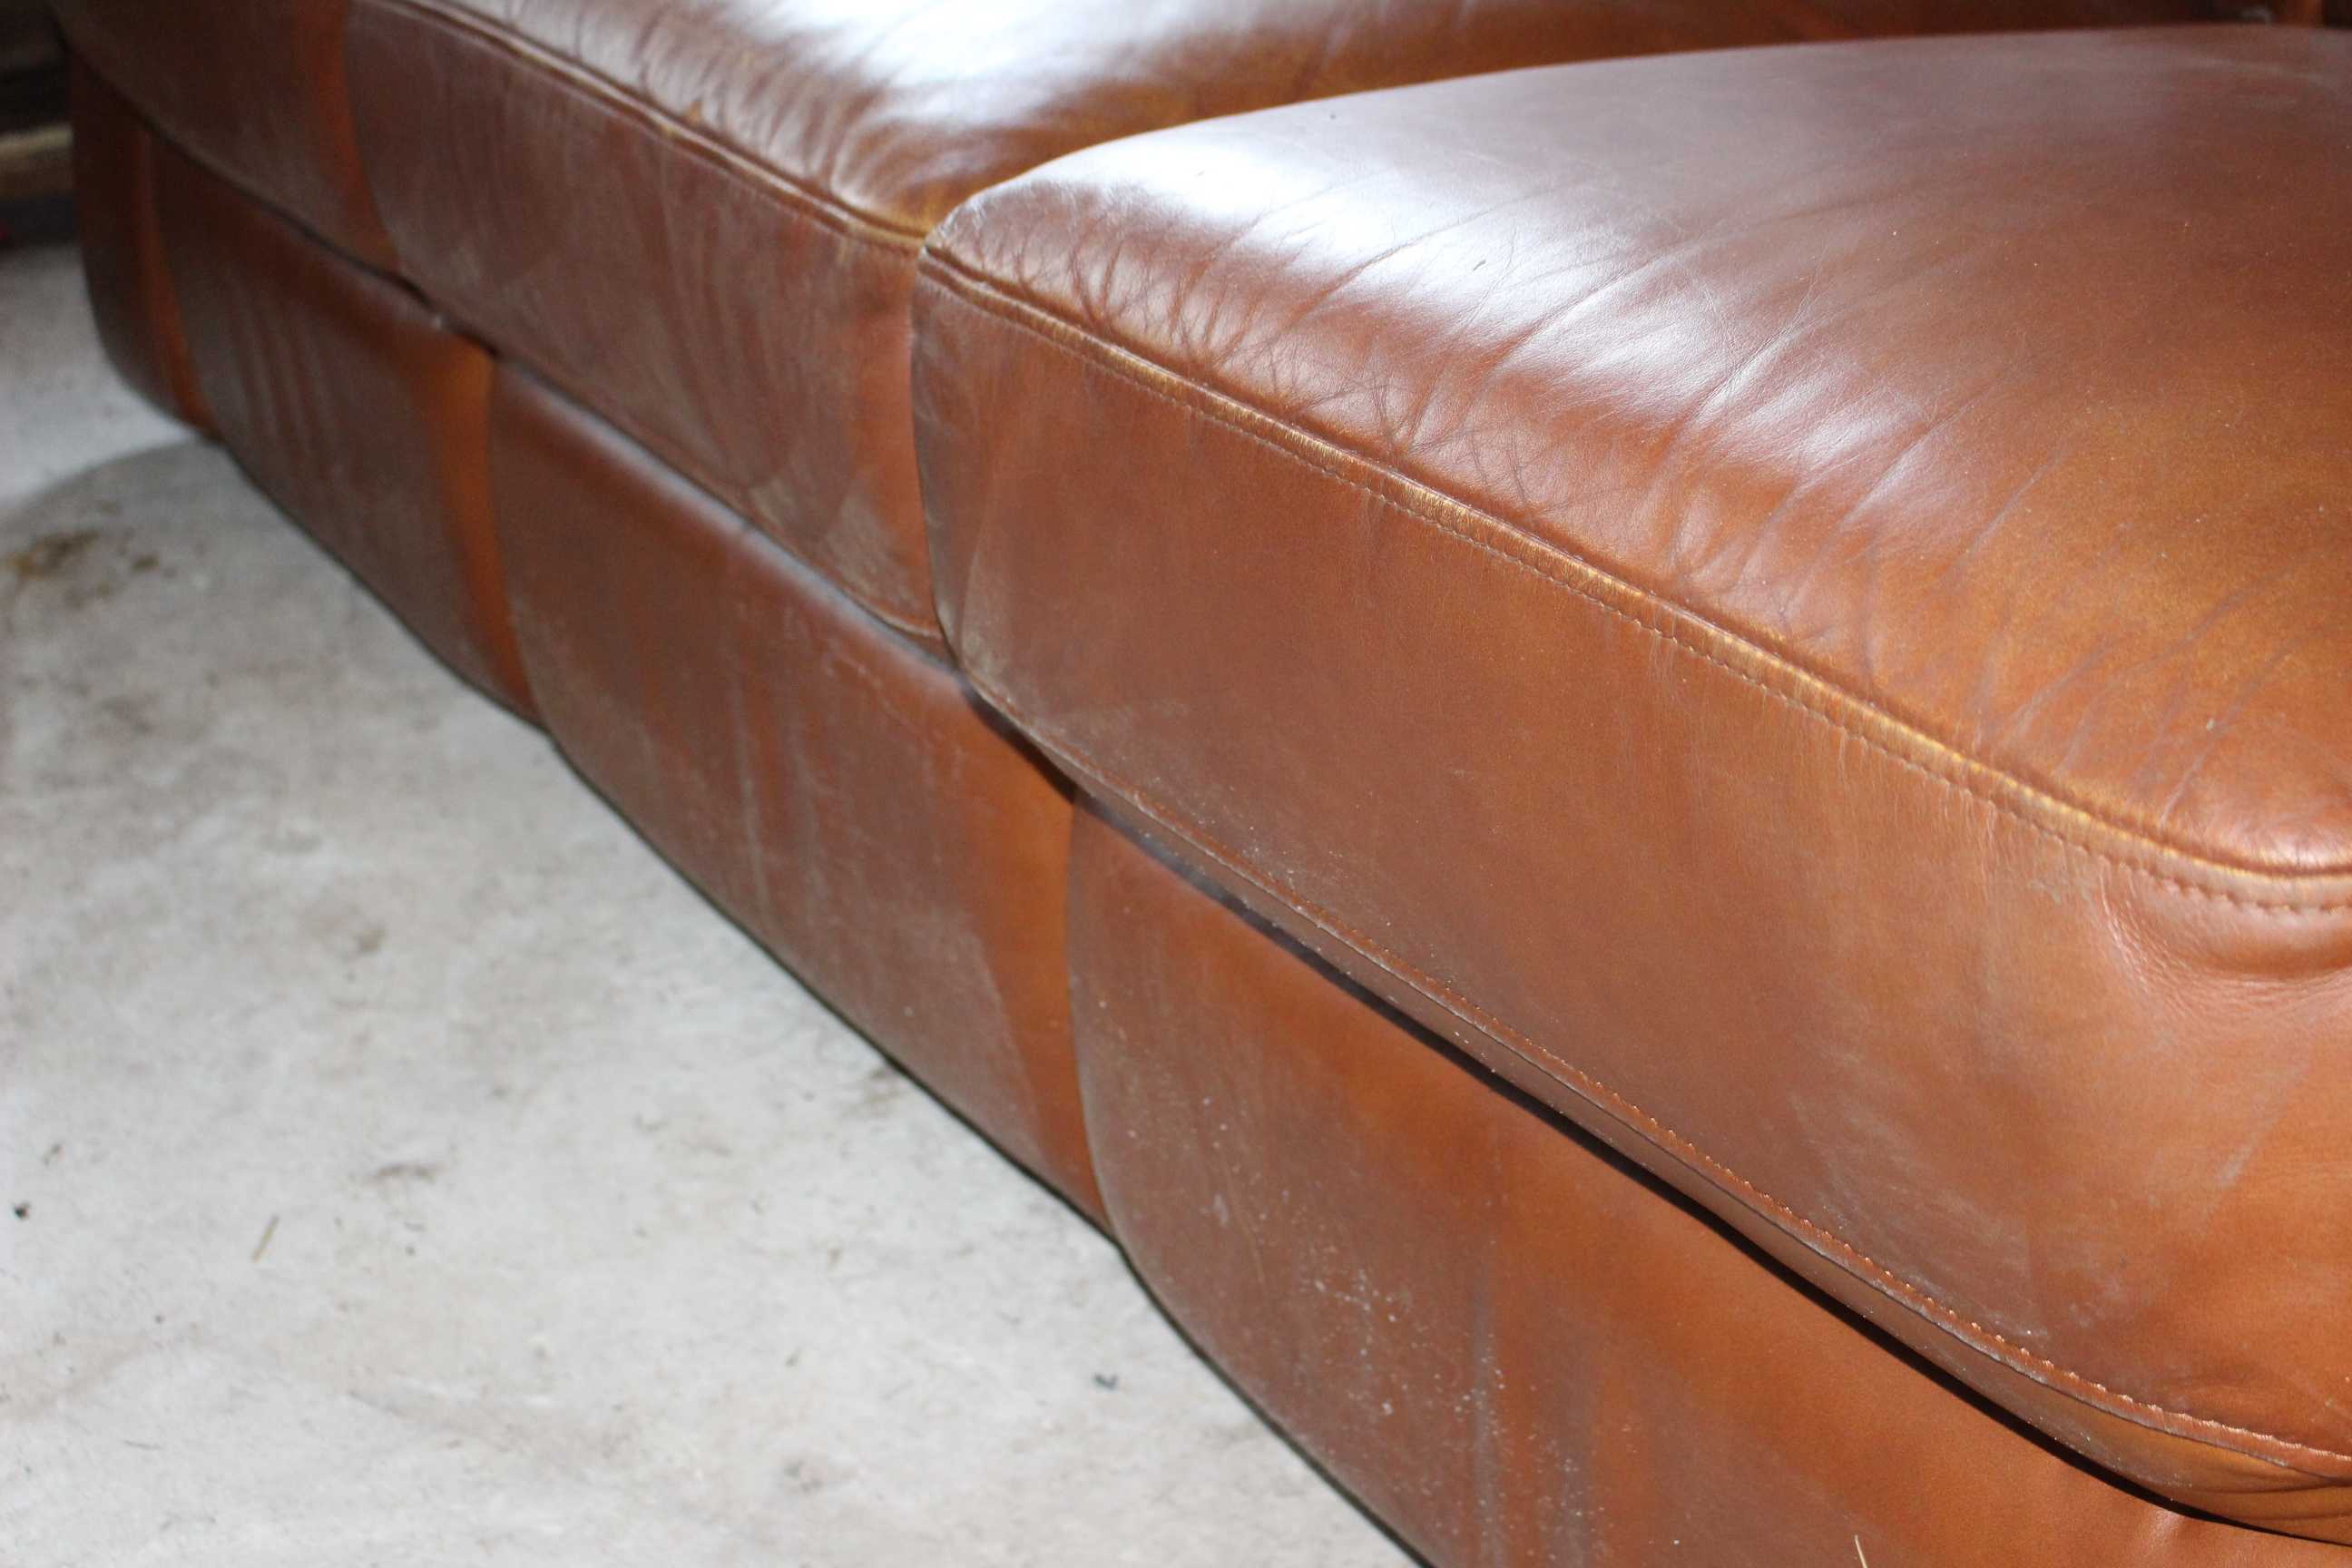 3 seater Tan leather retro style reclining sofa (outer 2 seats recline) small signs of normal use - Image 6 of 6